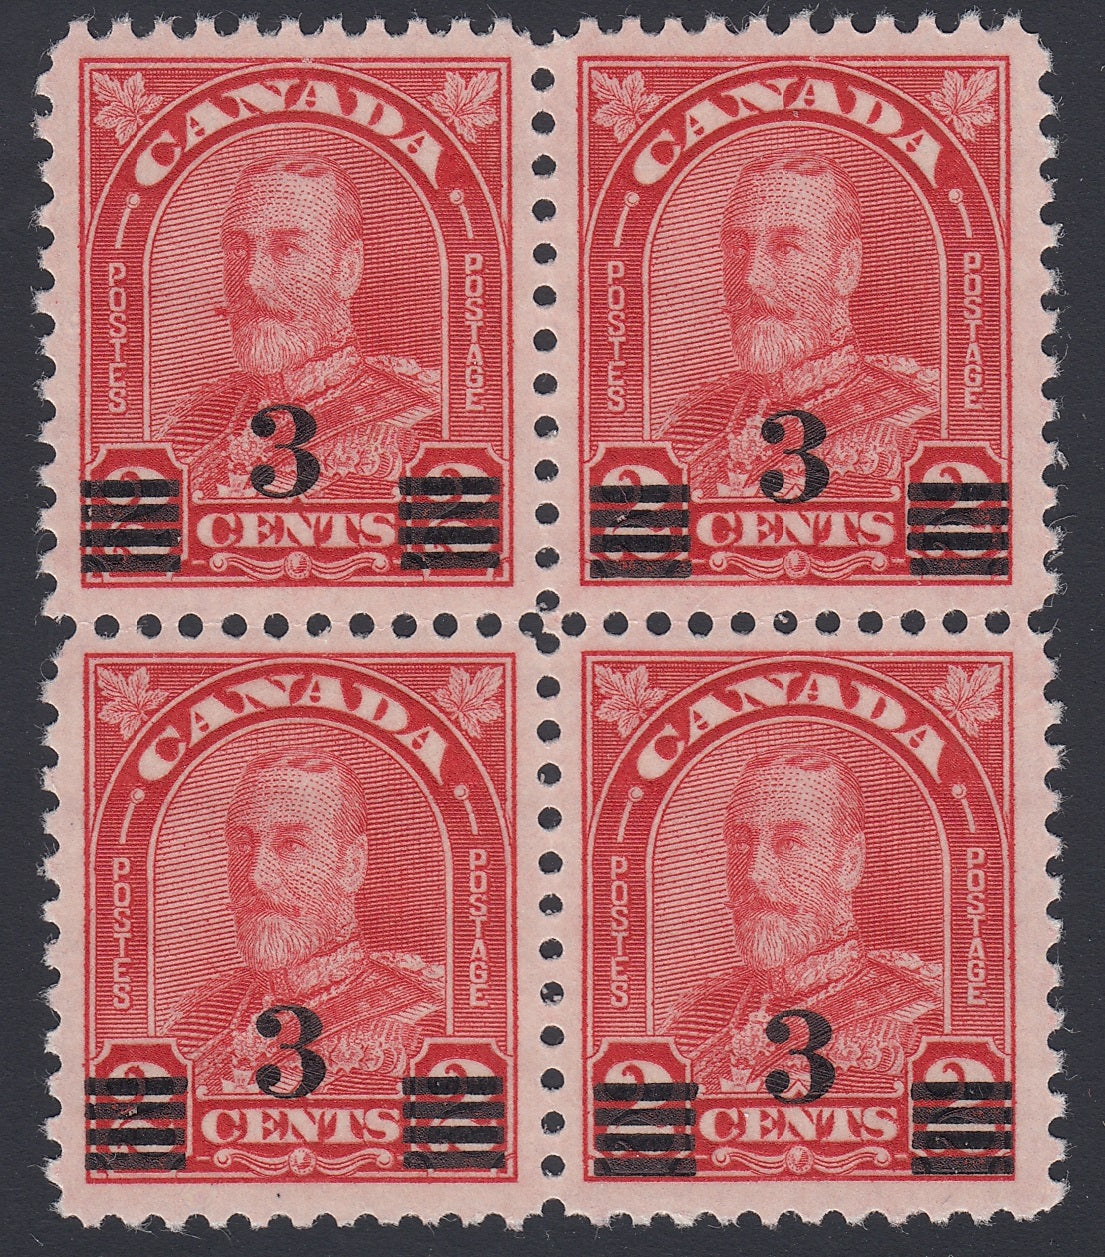 0191CA1805 - Canada #191i - Mint &#39;Extended Moustache&#39; Variety Block of 4